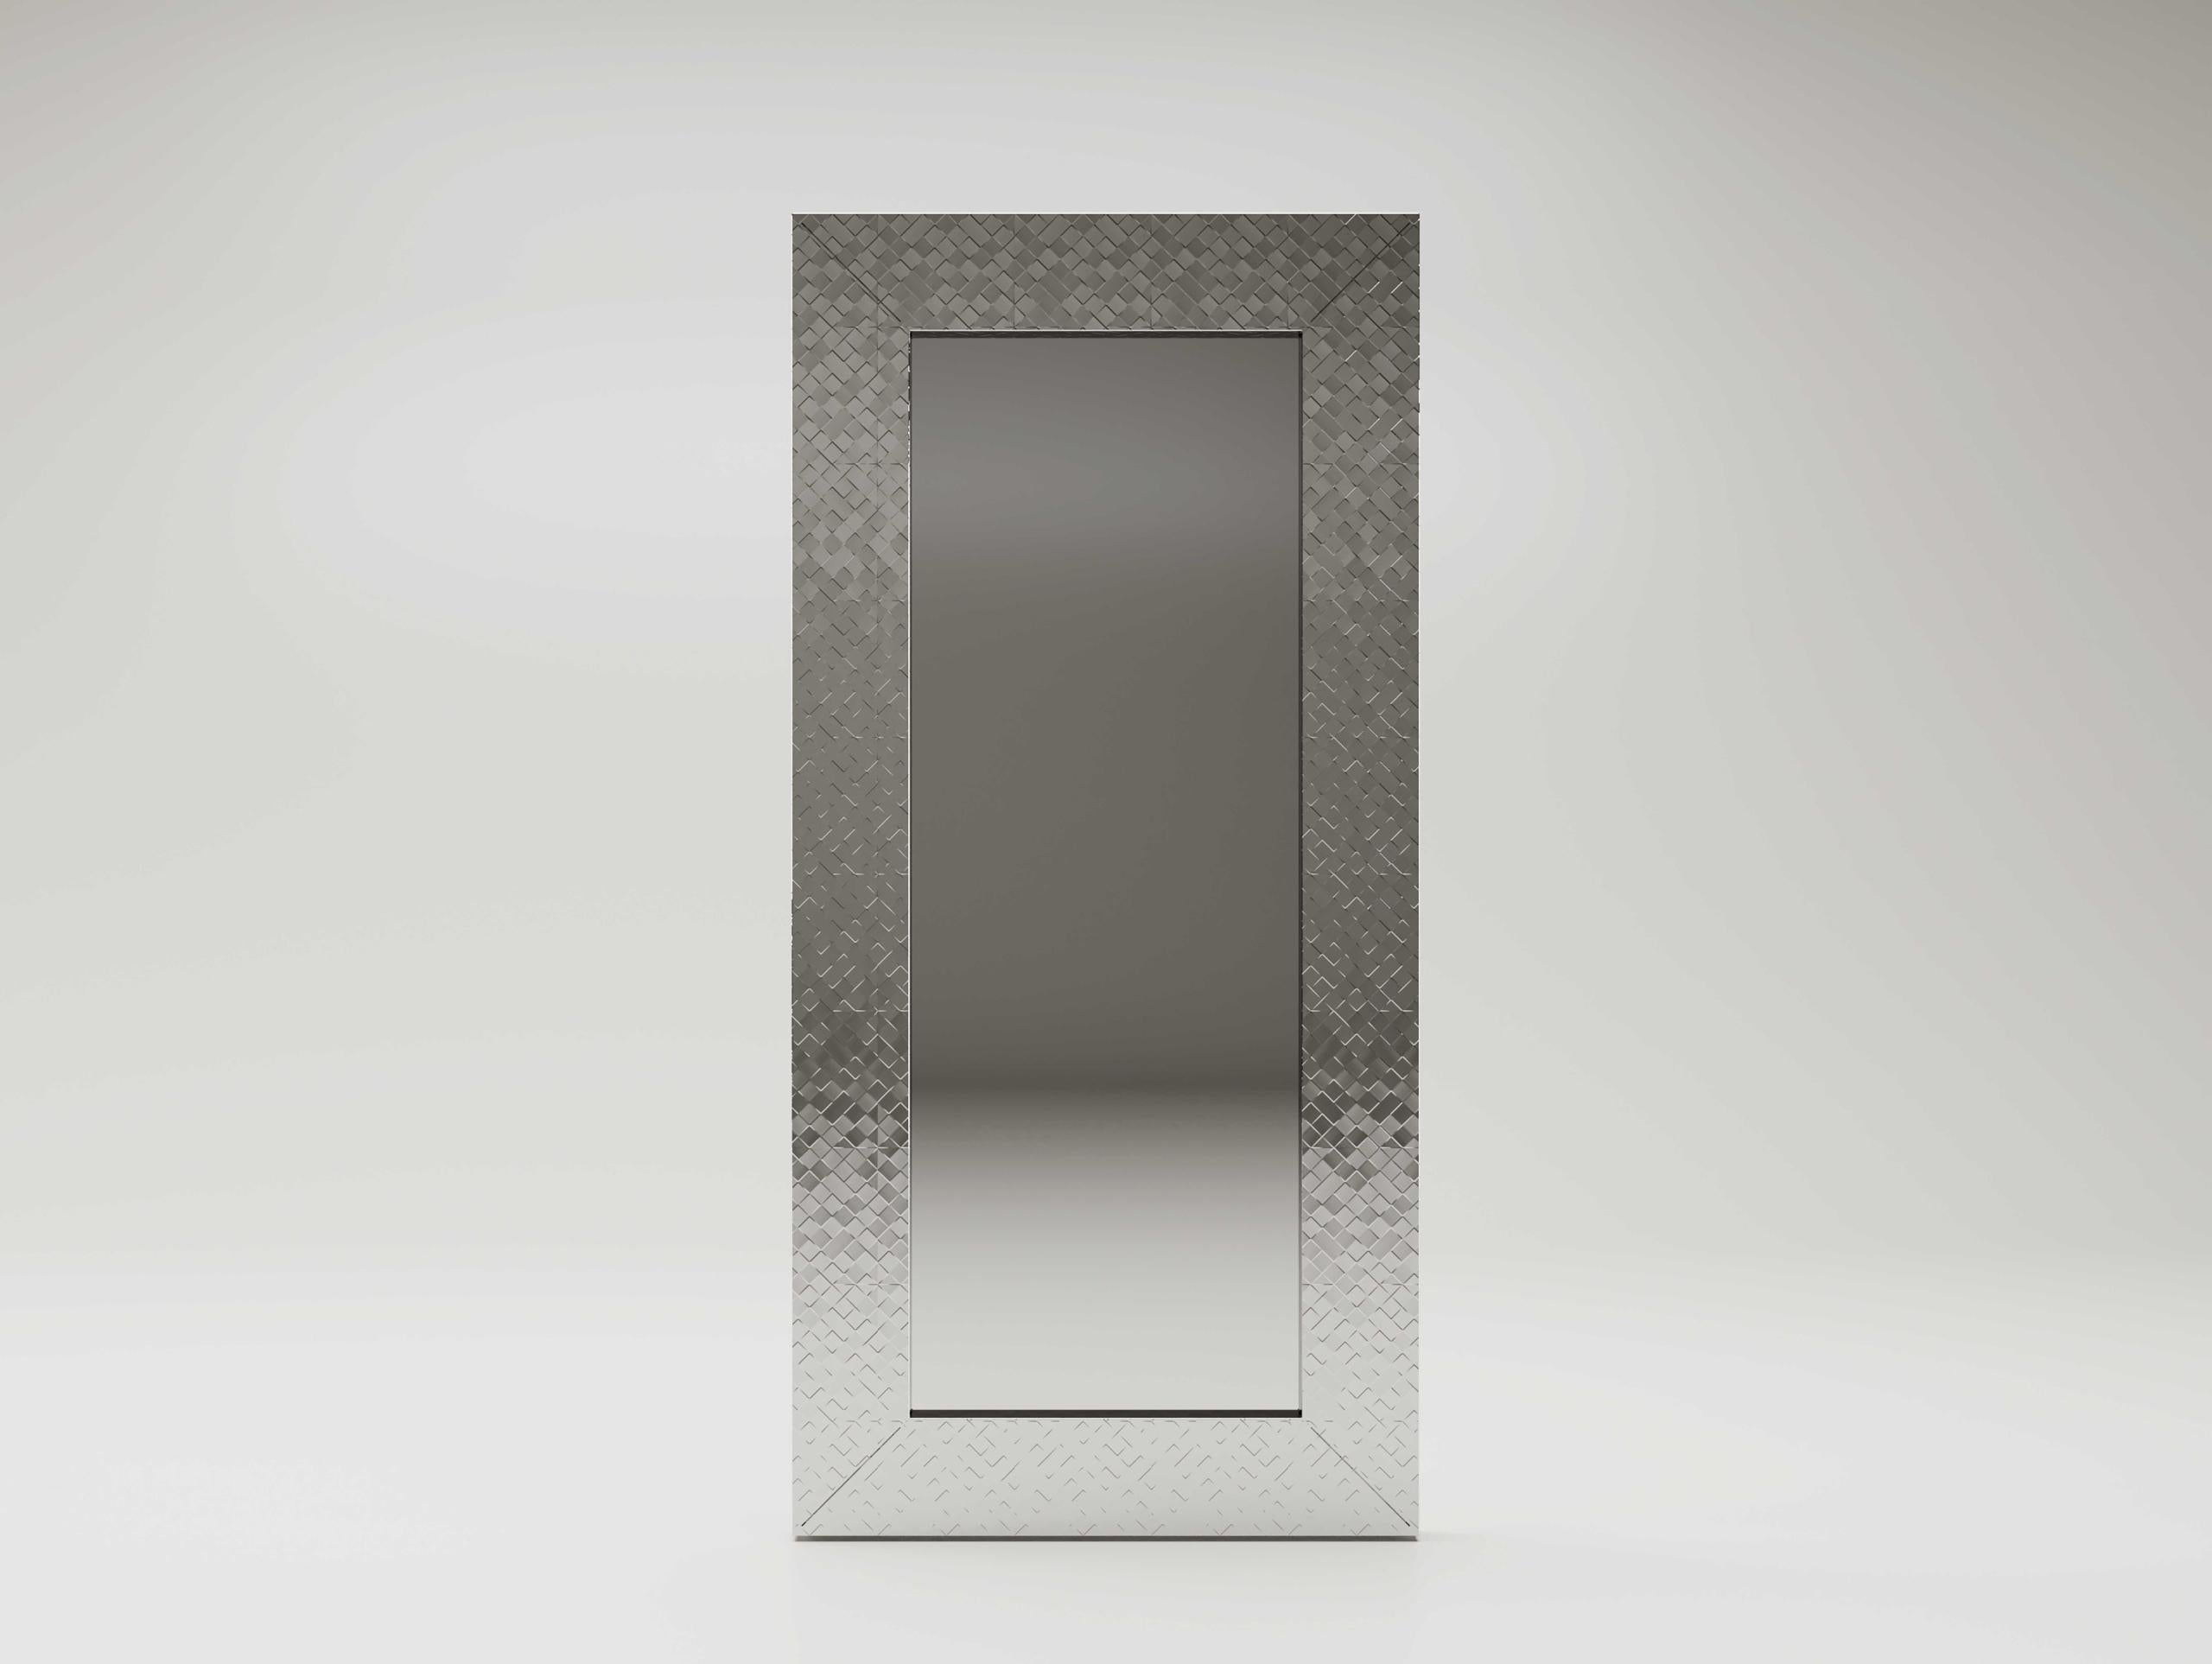 Diamante Mirror by Andrea Bonini
Limited Edition 
Dimensions: D 6 x W 120 x H 240 cm.
Materials: Galvanized steel and mirror.

Galvanized steel frame with diamante effect in silver. Made in Italy. Limited series, numbered and signed pieces. Custom